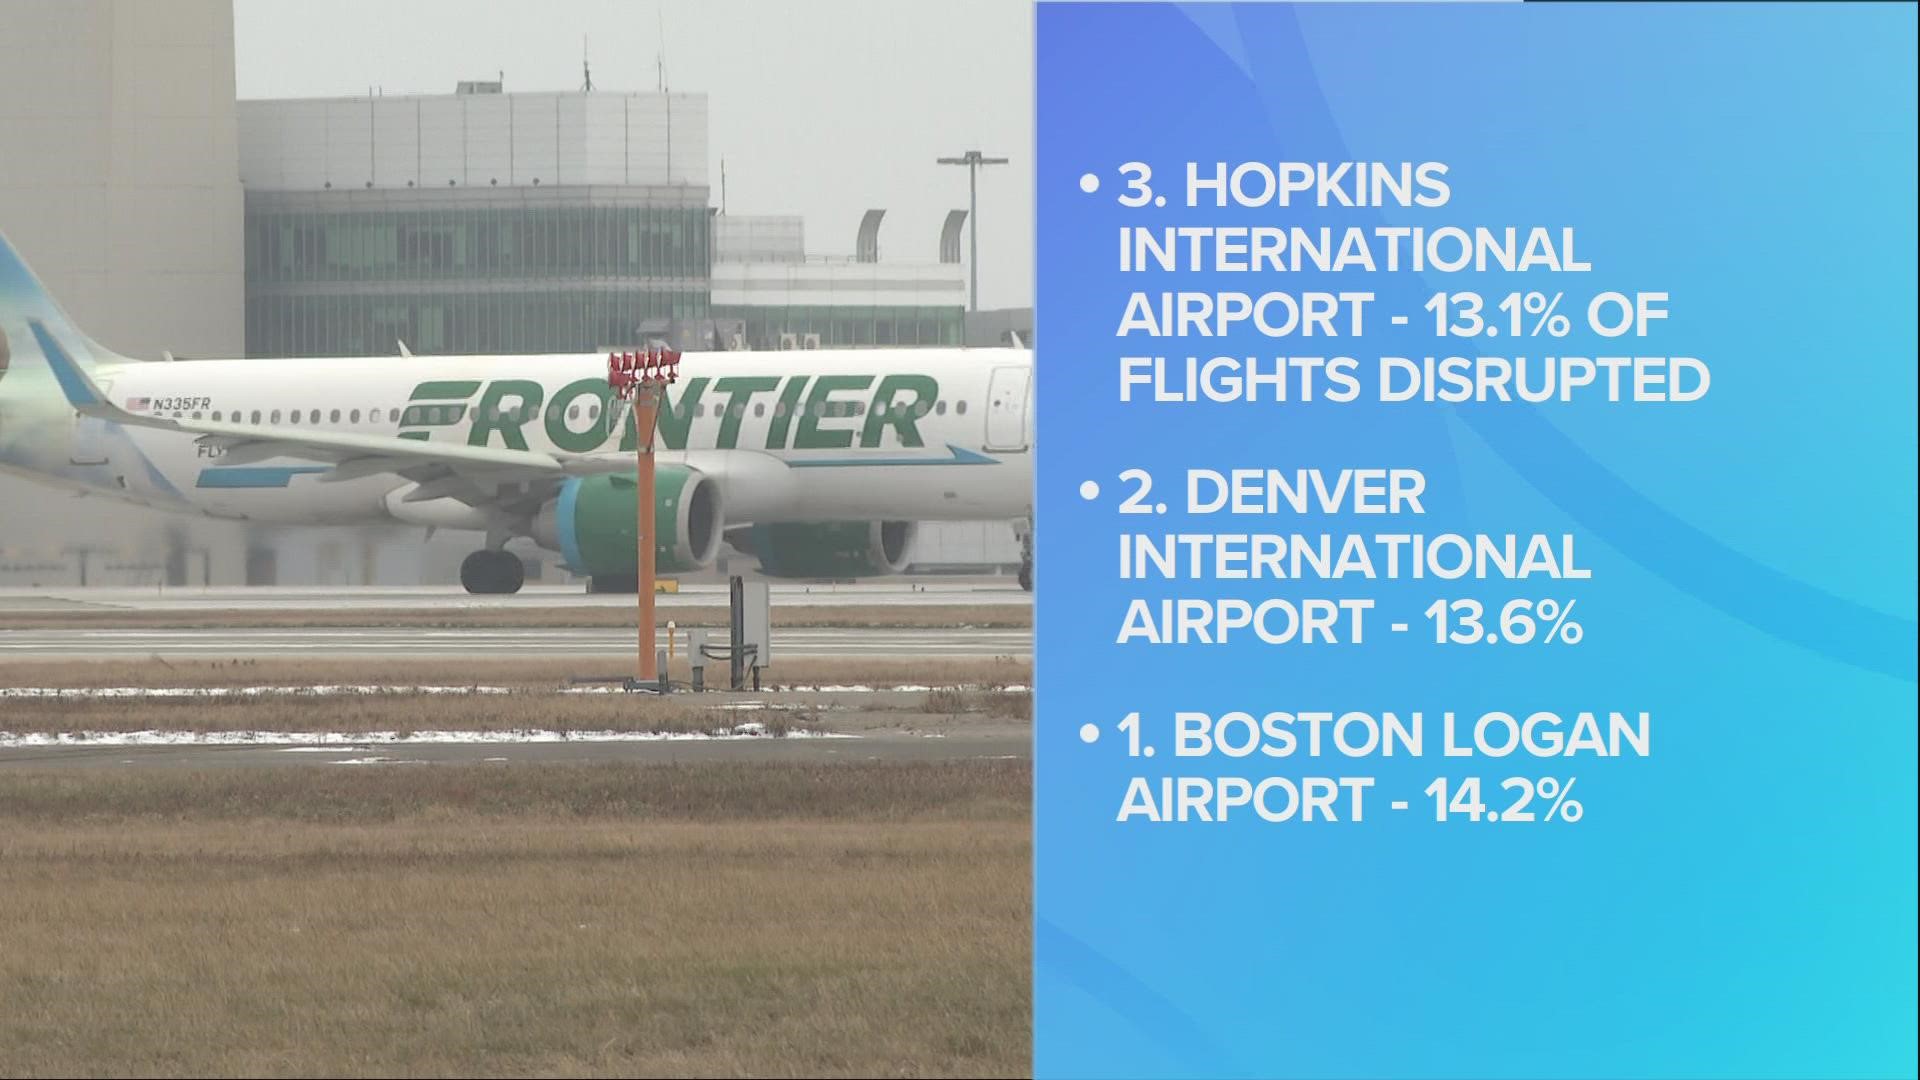 According to Hopper, 13.1% of Hopkins Airport flights are disrupted during the winter season.